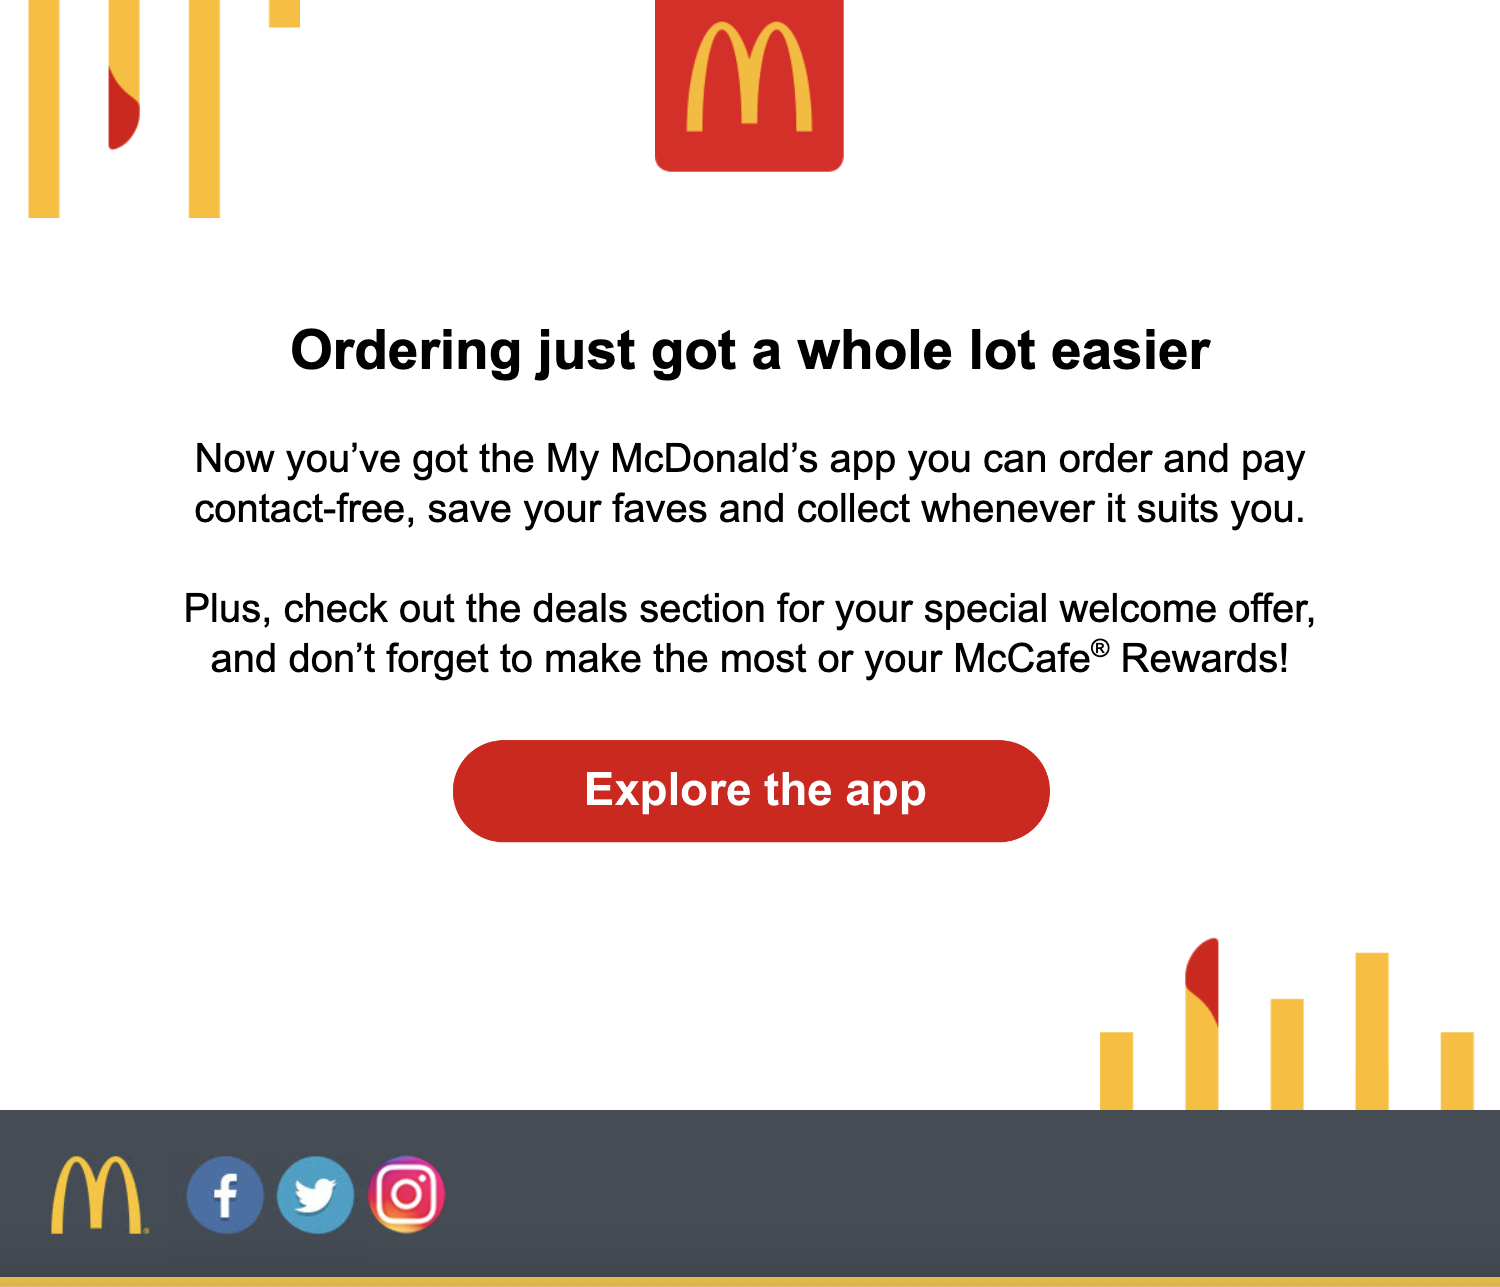 Emails from Mcdonald's to welcome new customers